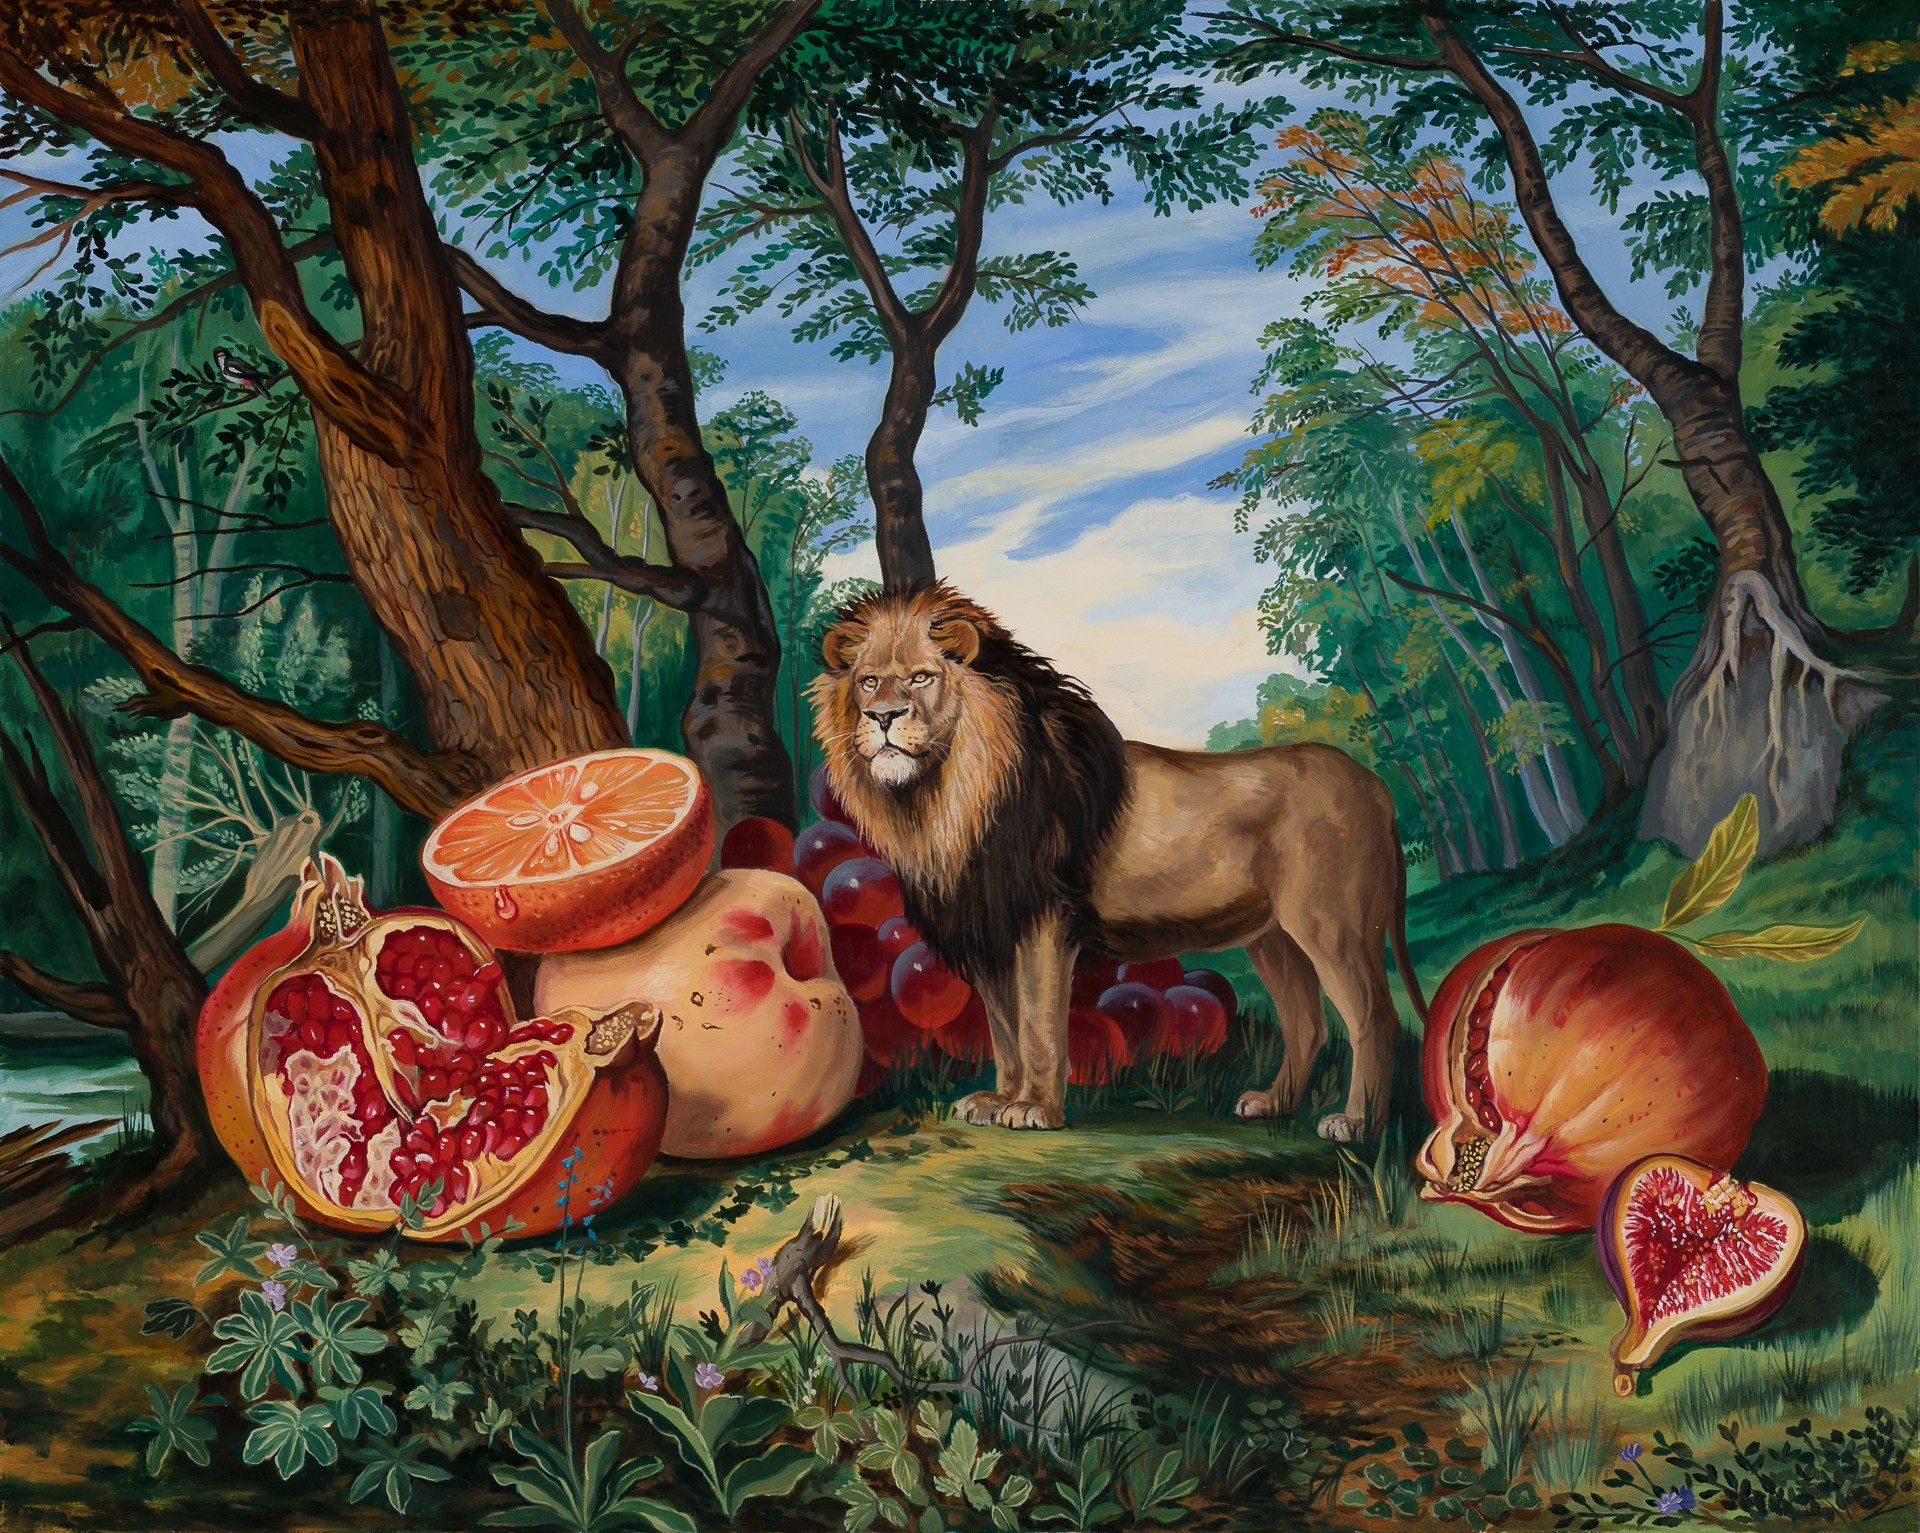 King of the Pomegranates by Robin Hextrum